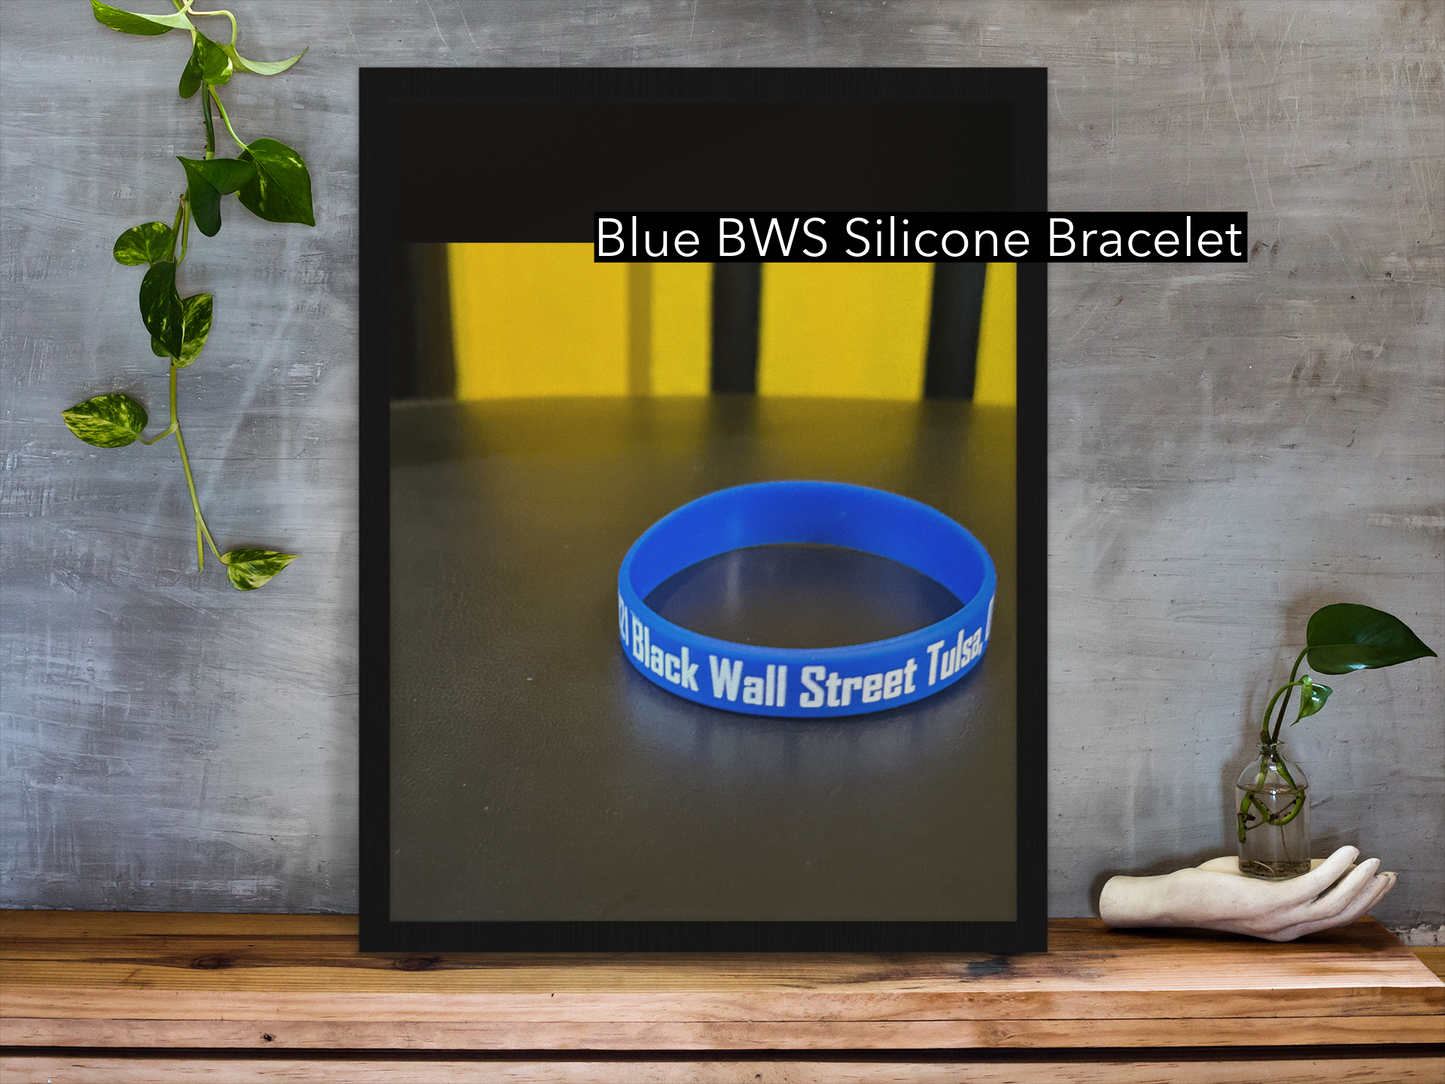 Black Wall Street Silicone Bracelets (assorted colors)